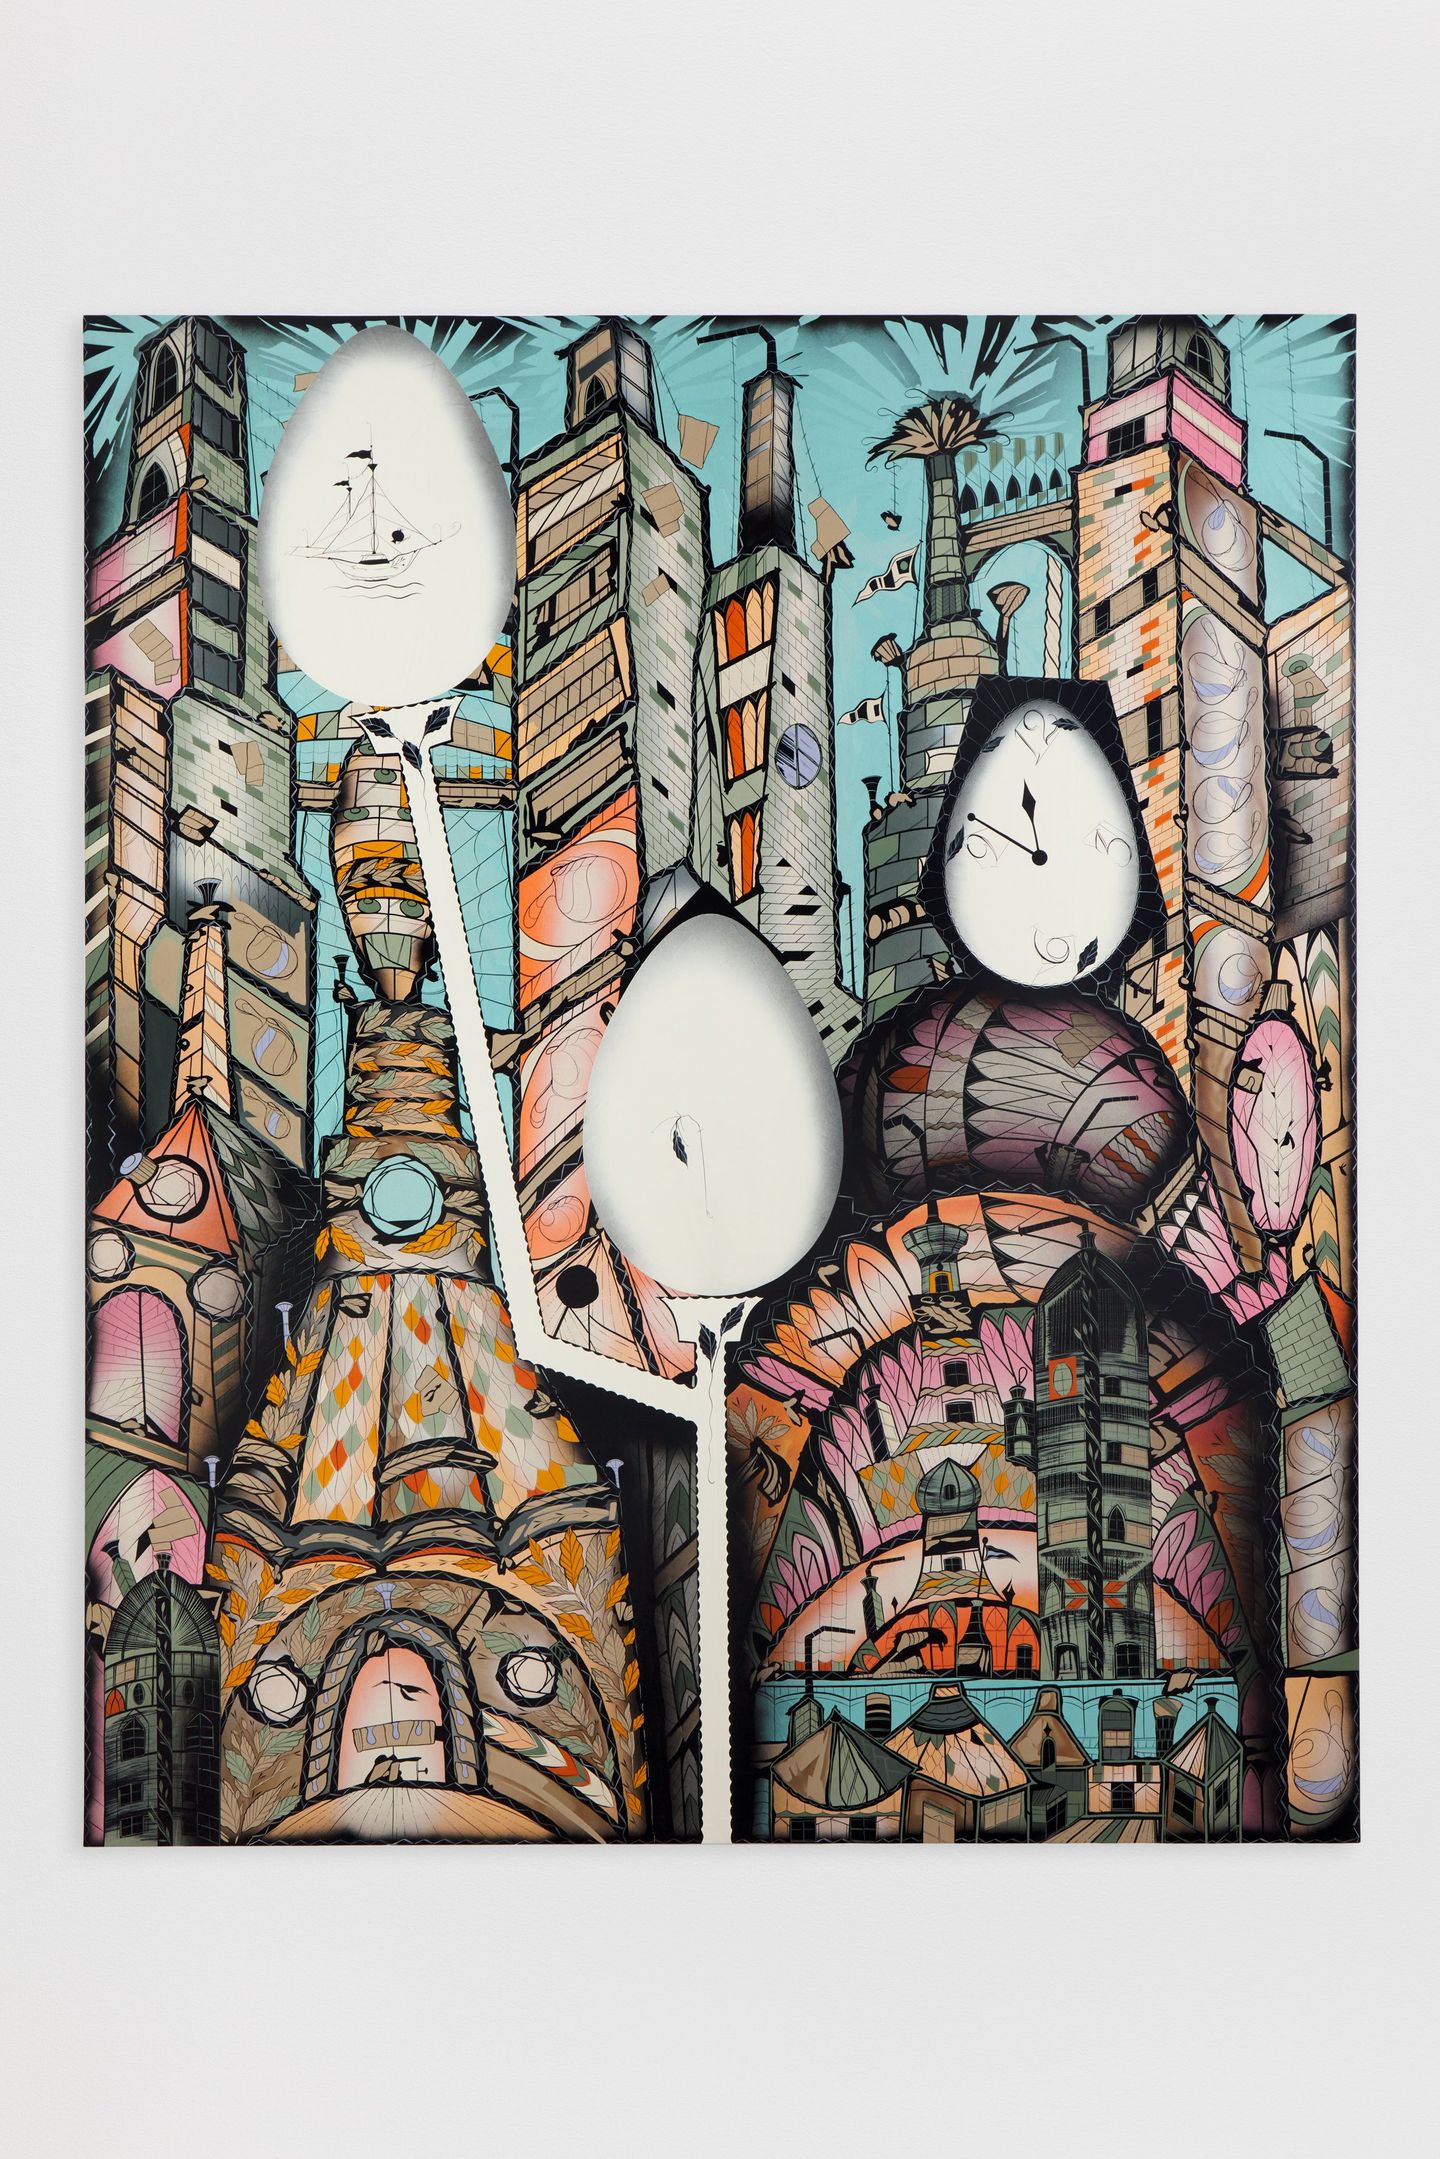 Lari Pittman, Luminous: Cities with Egg Monuments 2 (2022). Cel-vinyl and lacquer spray over gessoed canvas on titanium and wood panel. 243.8 x 203.2 cm. © Lari Pittman. Courtesy Regen Projects, Los Angeles and Lehmann Maupin, New York, Hong Kong, and Seoul. Photo: Evan Bedford.